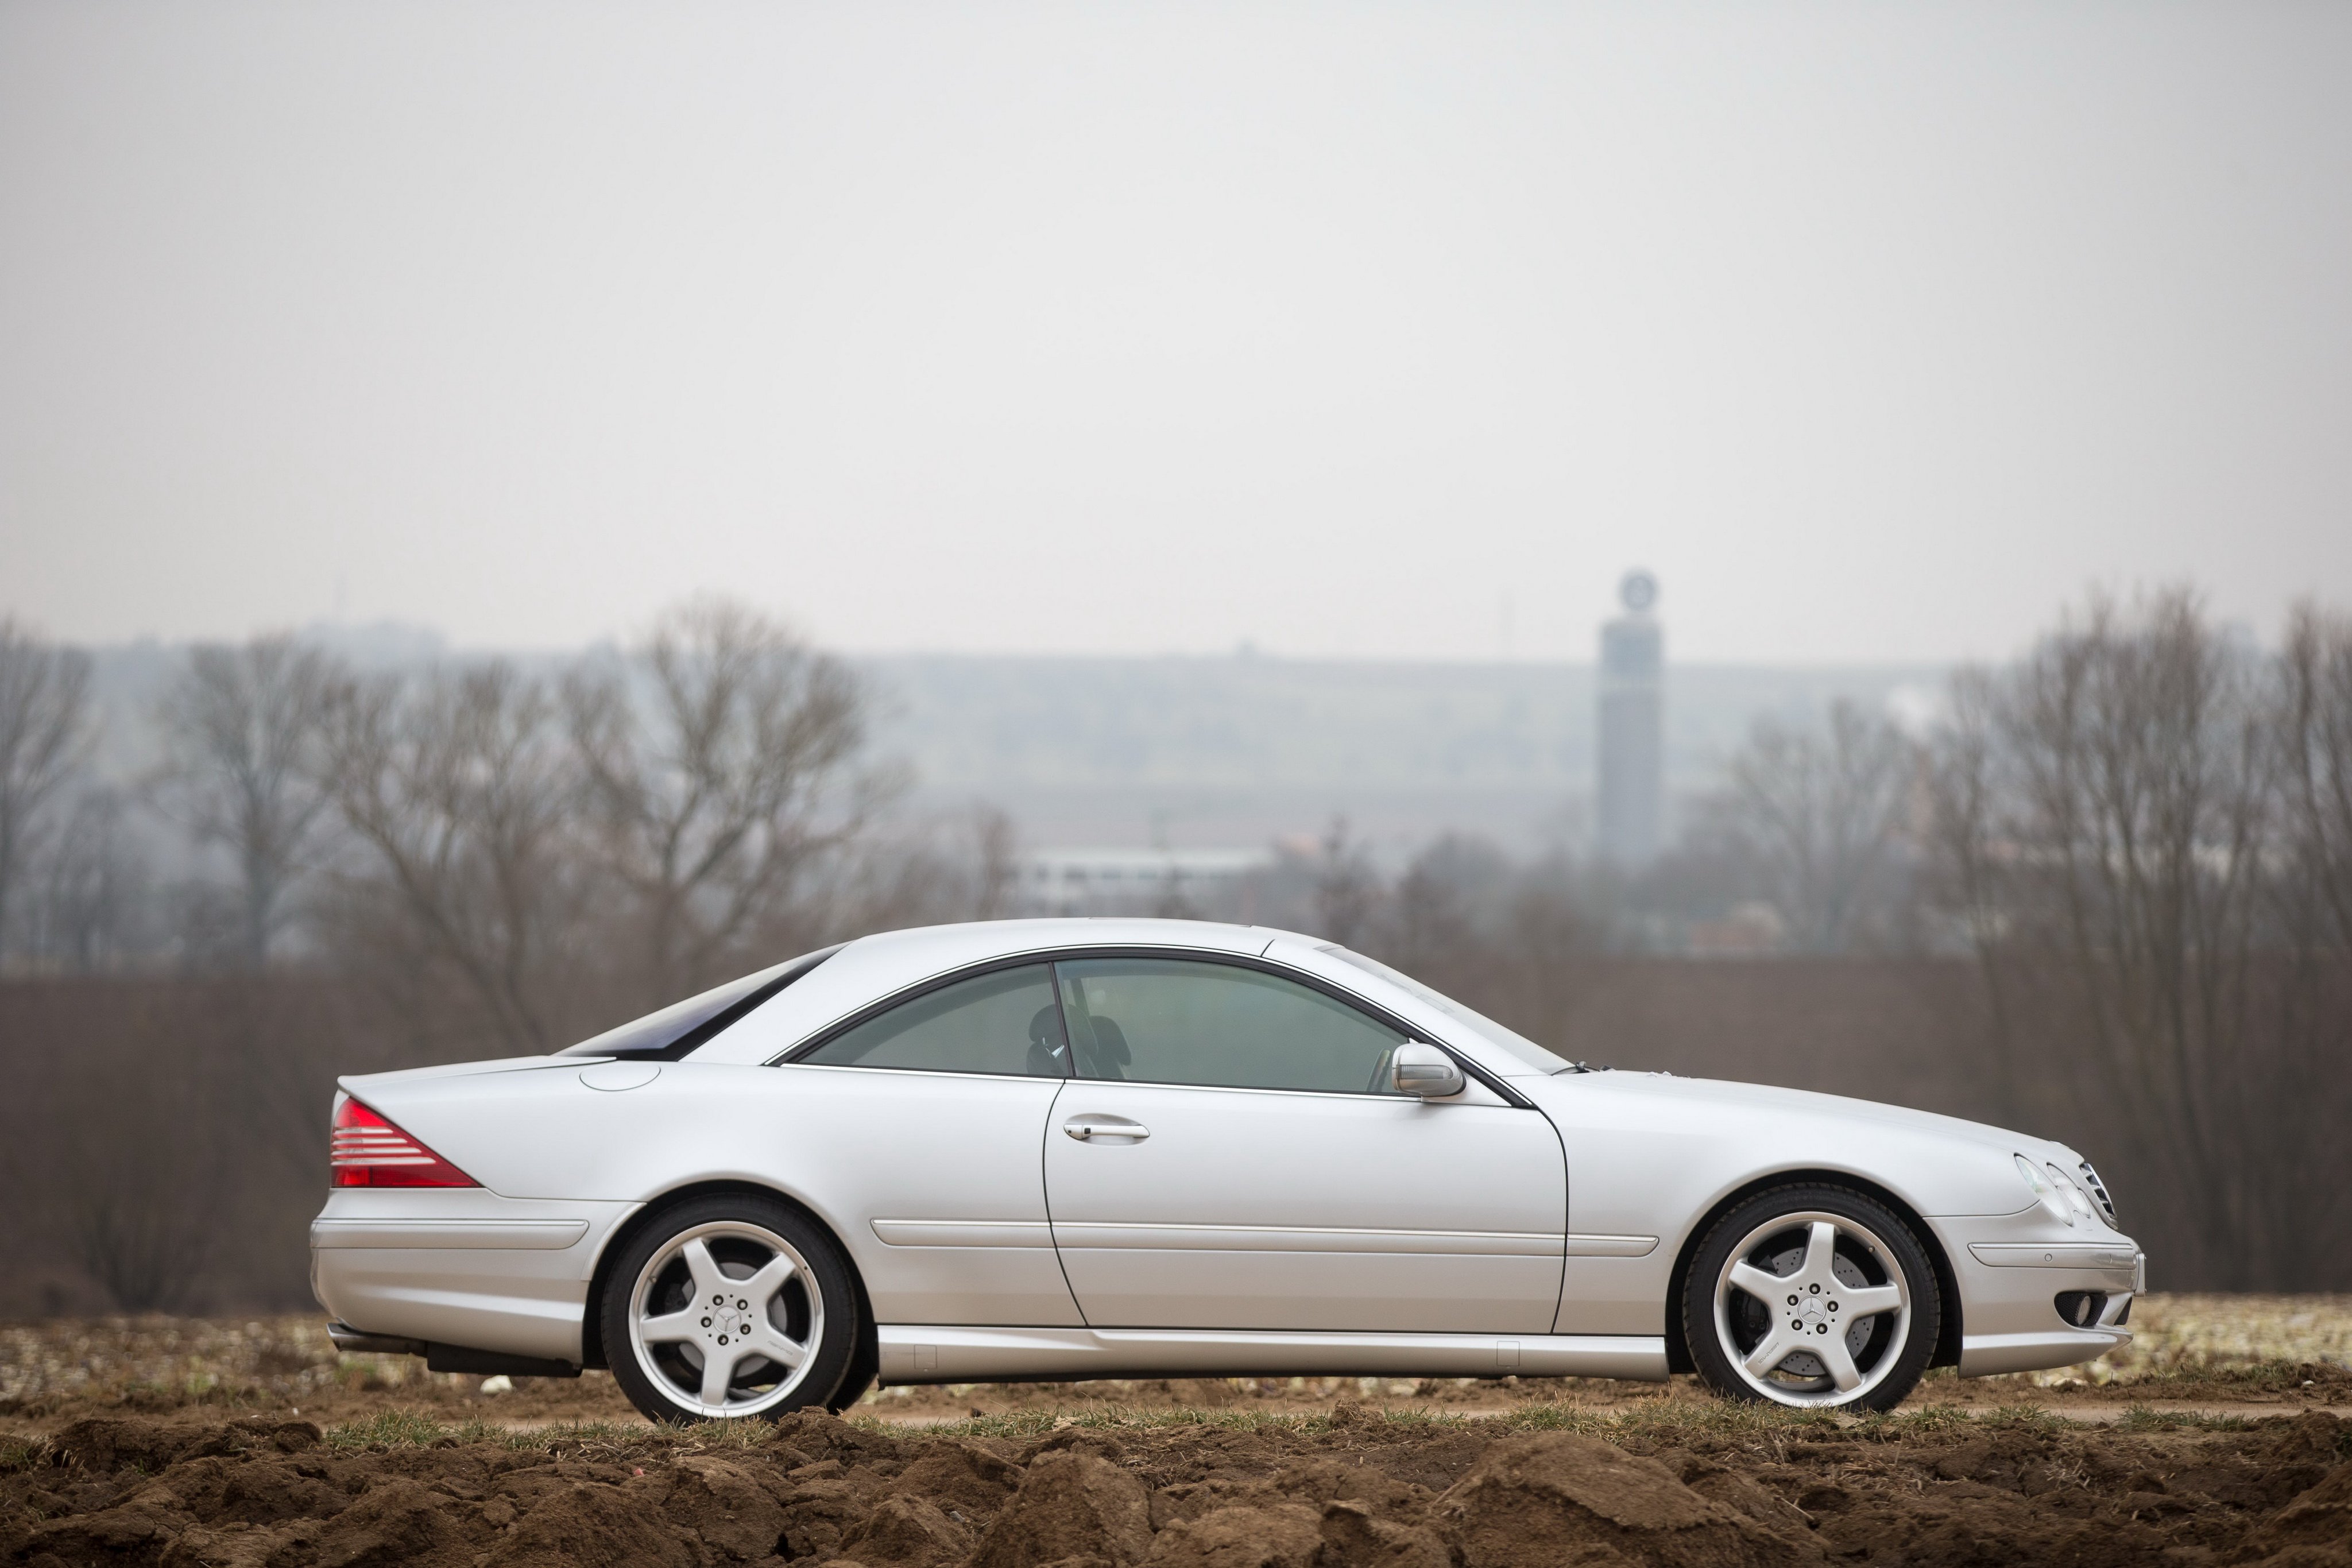 mercedes, Benz, Cl, 63, Amg, C215, 2001, Cars, Coupe Wallpaper